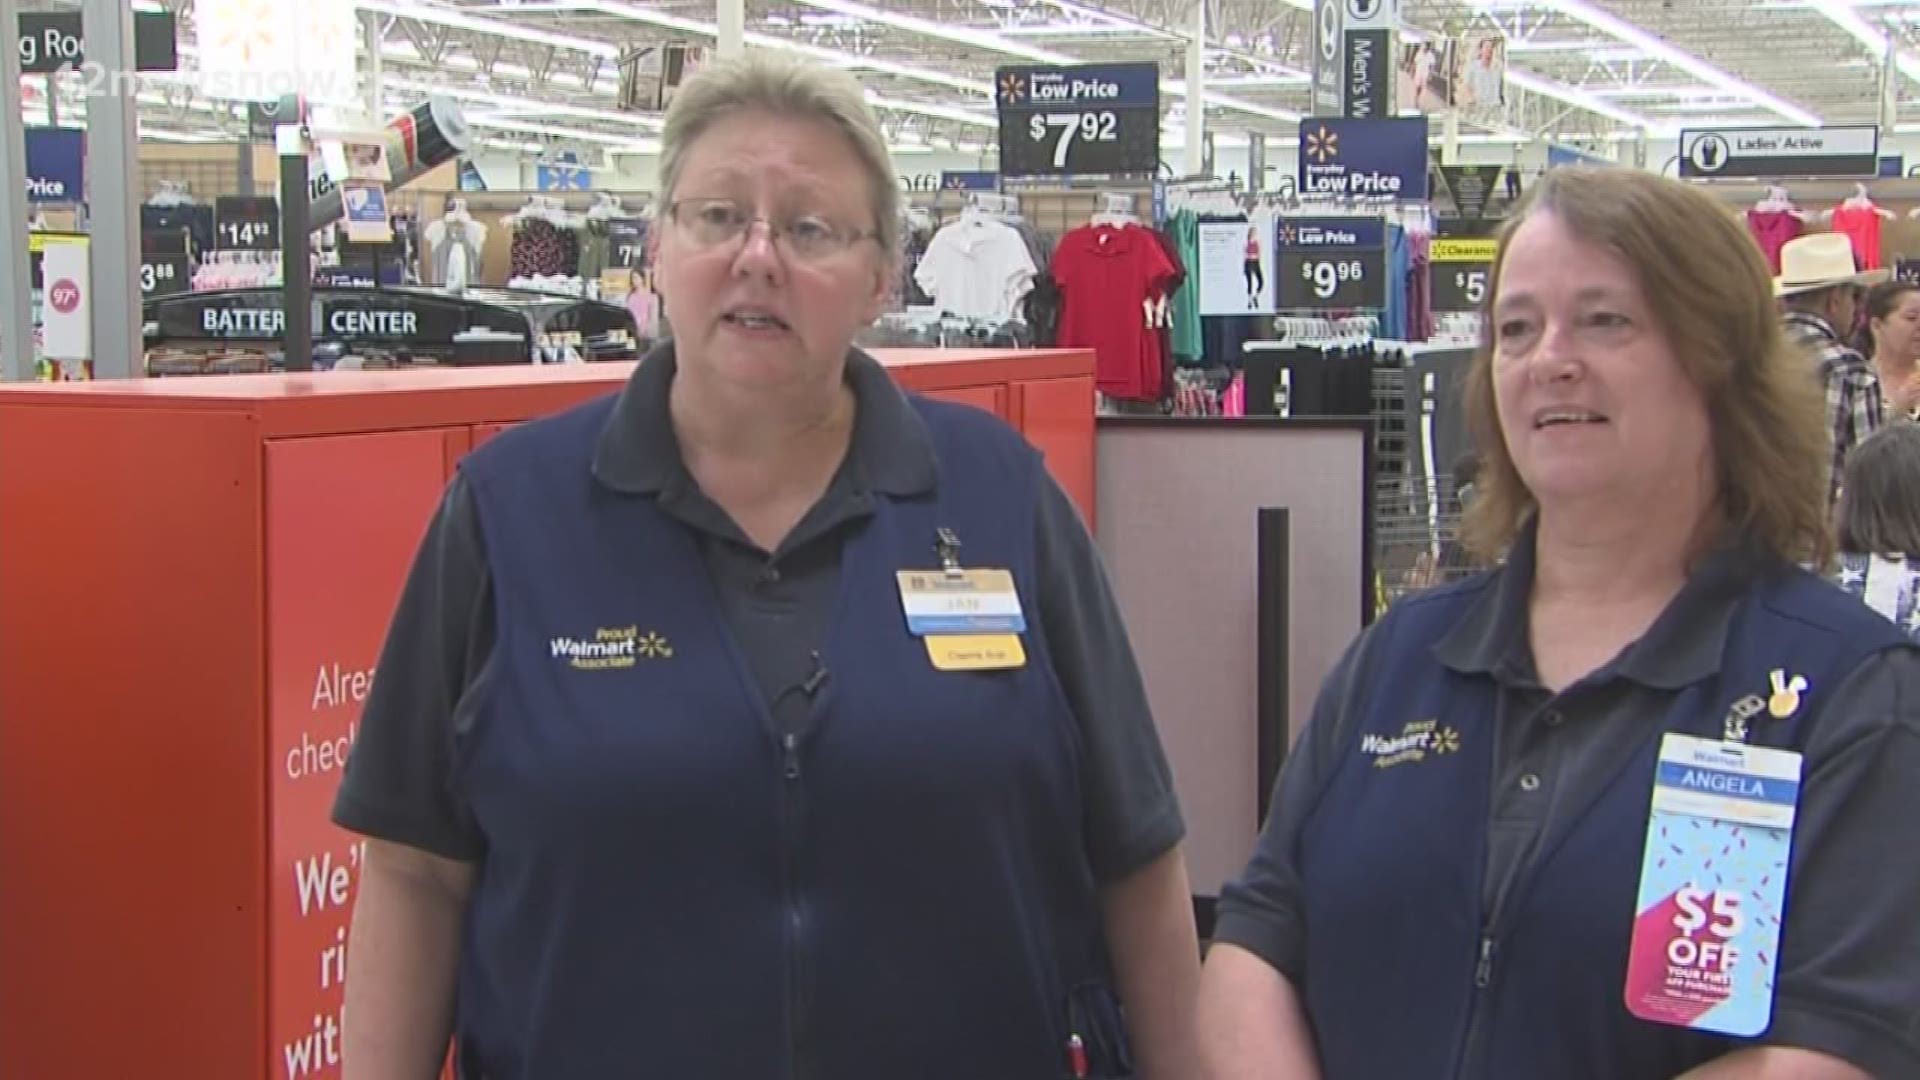 Along with the store celebrating 35 years, two workers have worked at the store for over 30 years